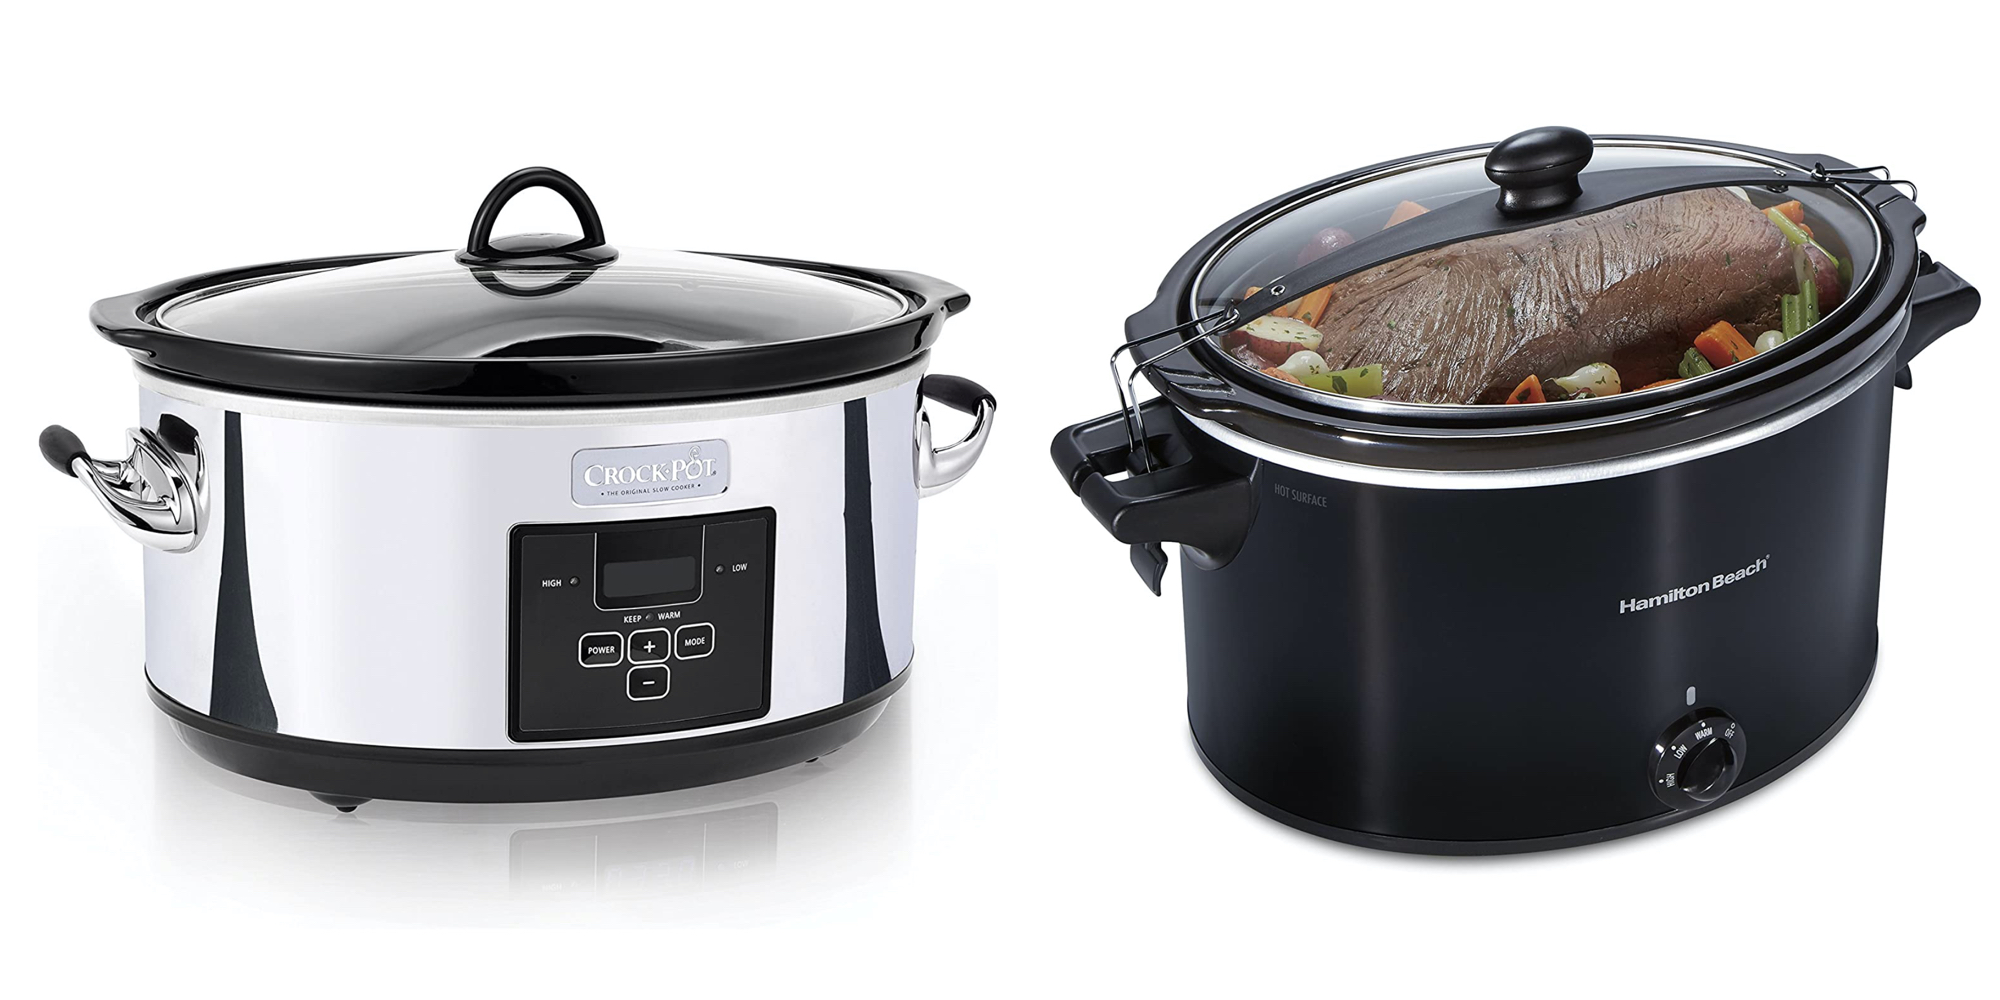  Crock-Pot 3.5 Quart Casserole Manual Slow Cooker, Charcoal &  Crockpot 8 Quart Slow Cooker with Auto Warm Setting and Cookbook, Black  Stainless Steel: Home & Kitchen